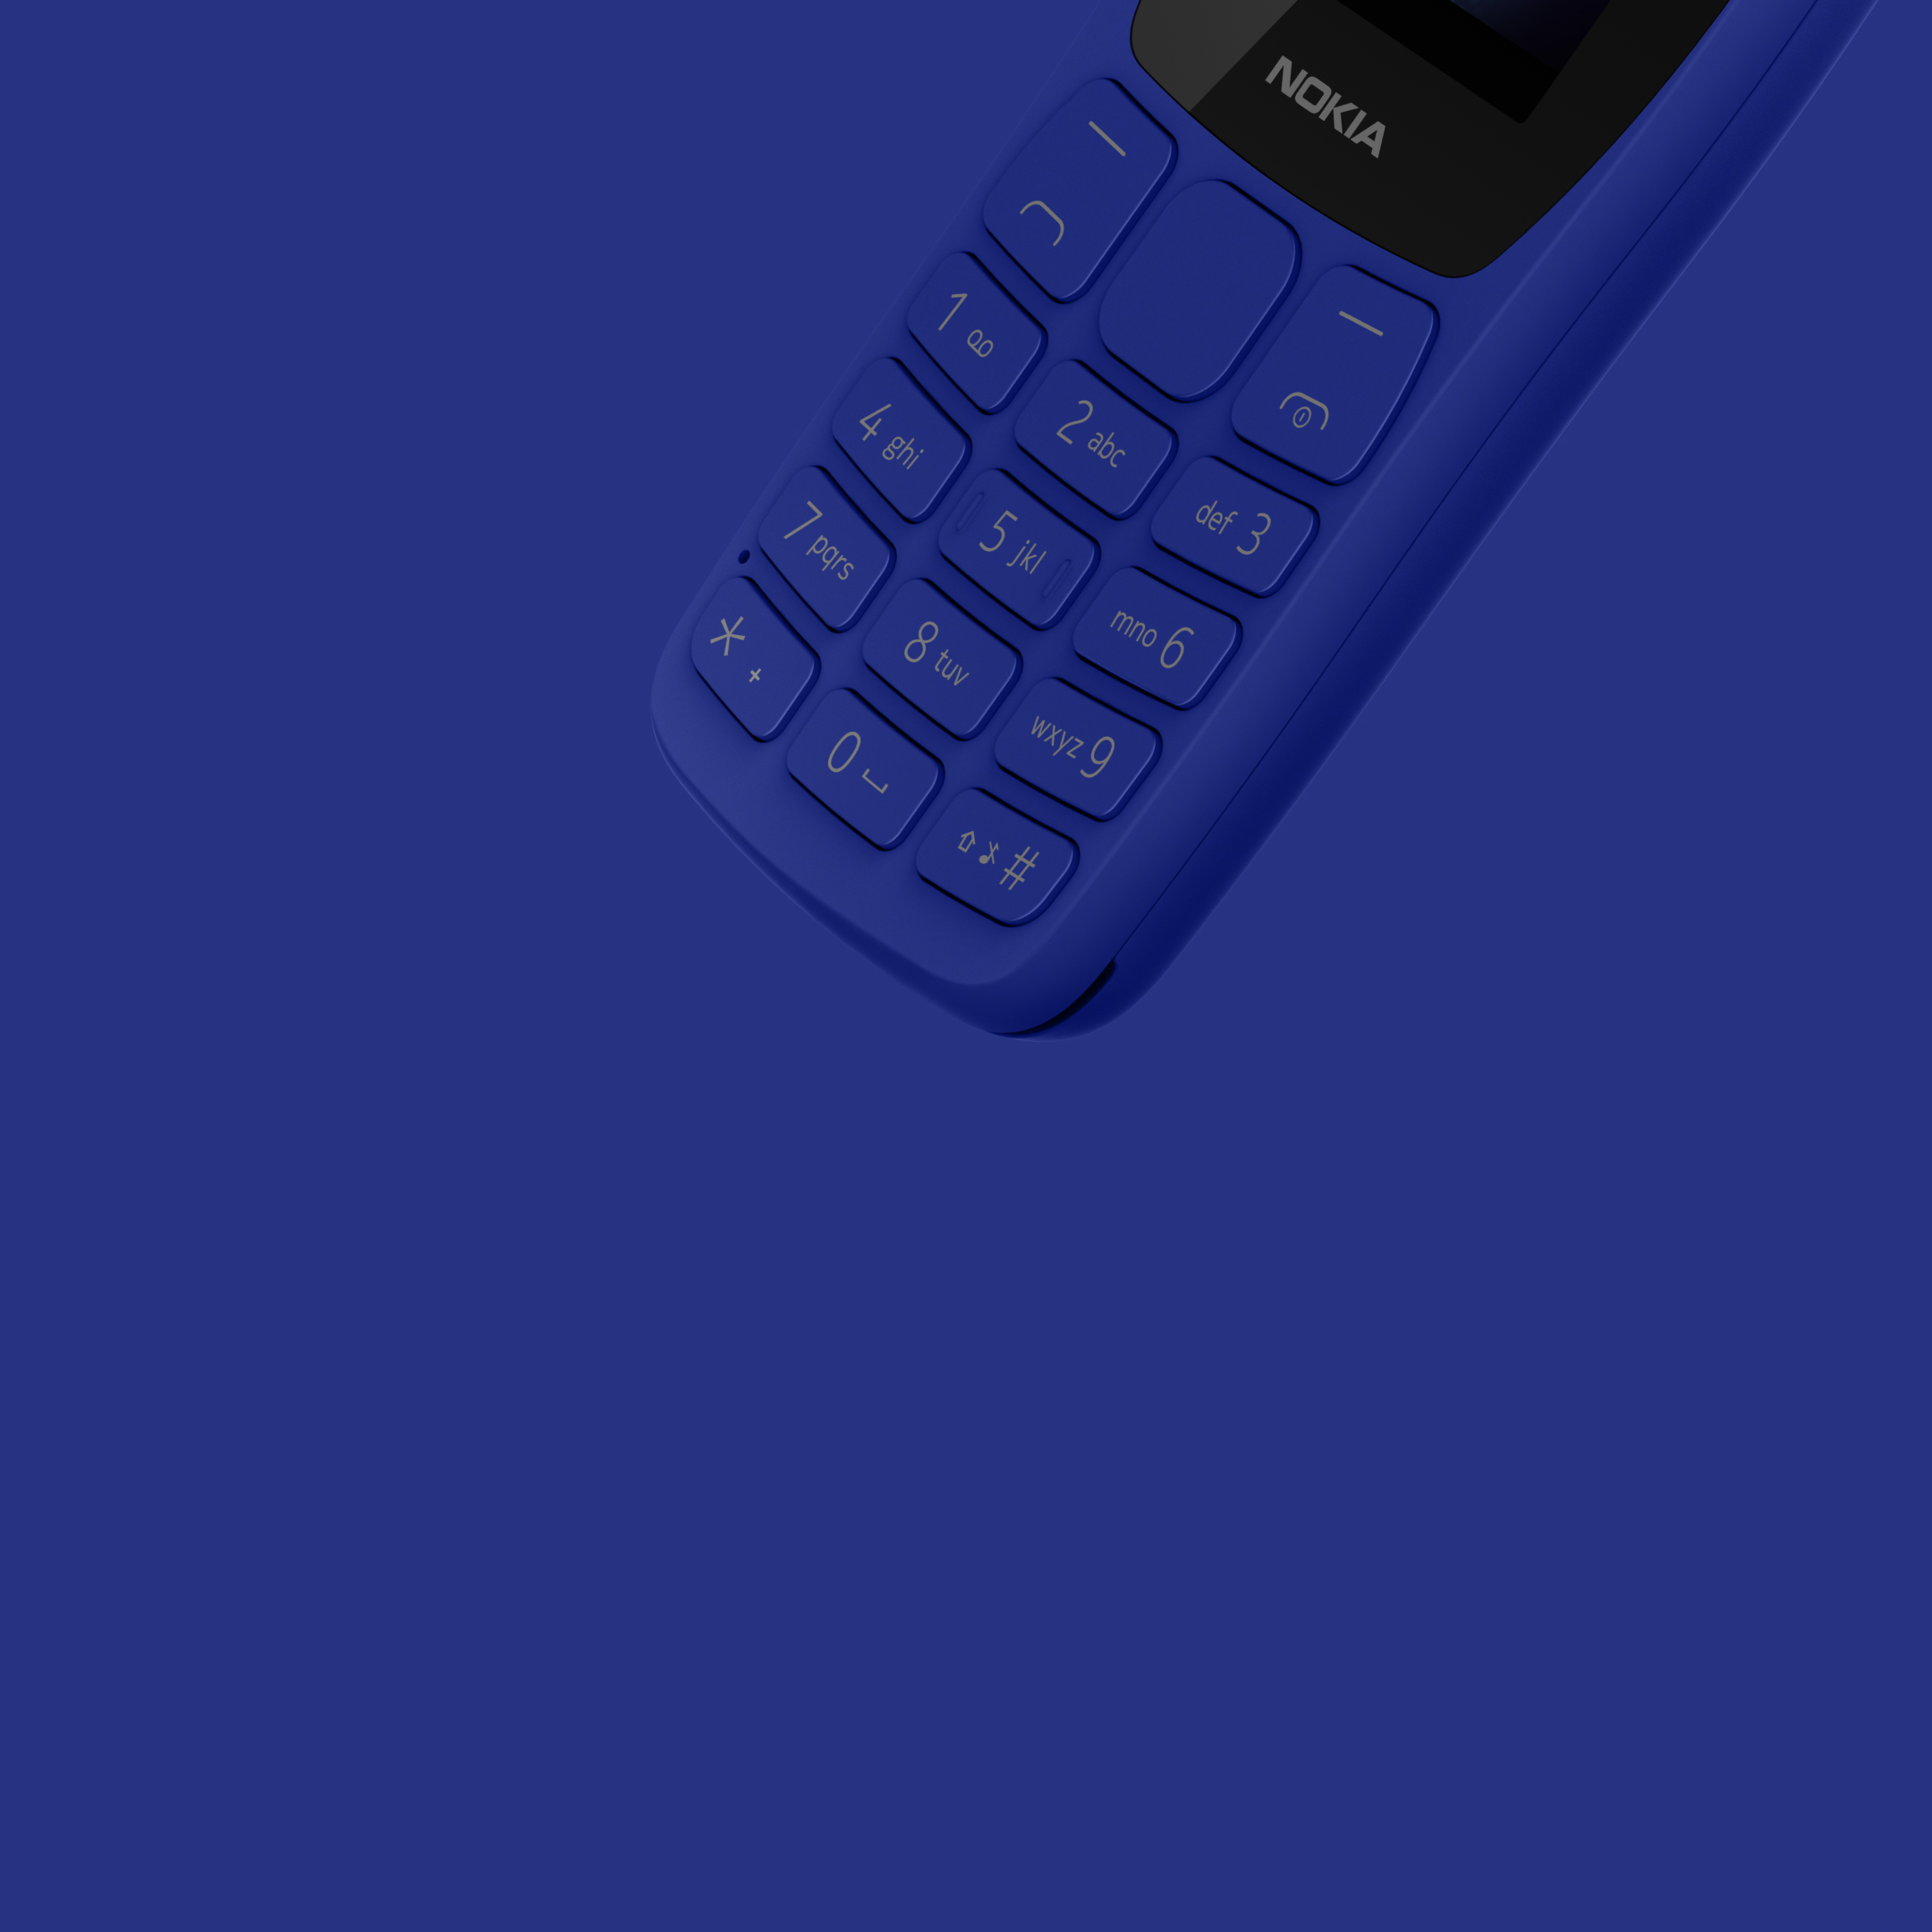 Nokia 105 Africa Edition (dual SIM) - This Is Your Grandfather's (or  Grandkid's) Cellphone - Stuff South Africa